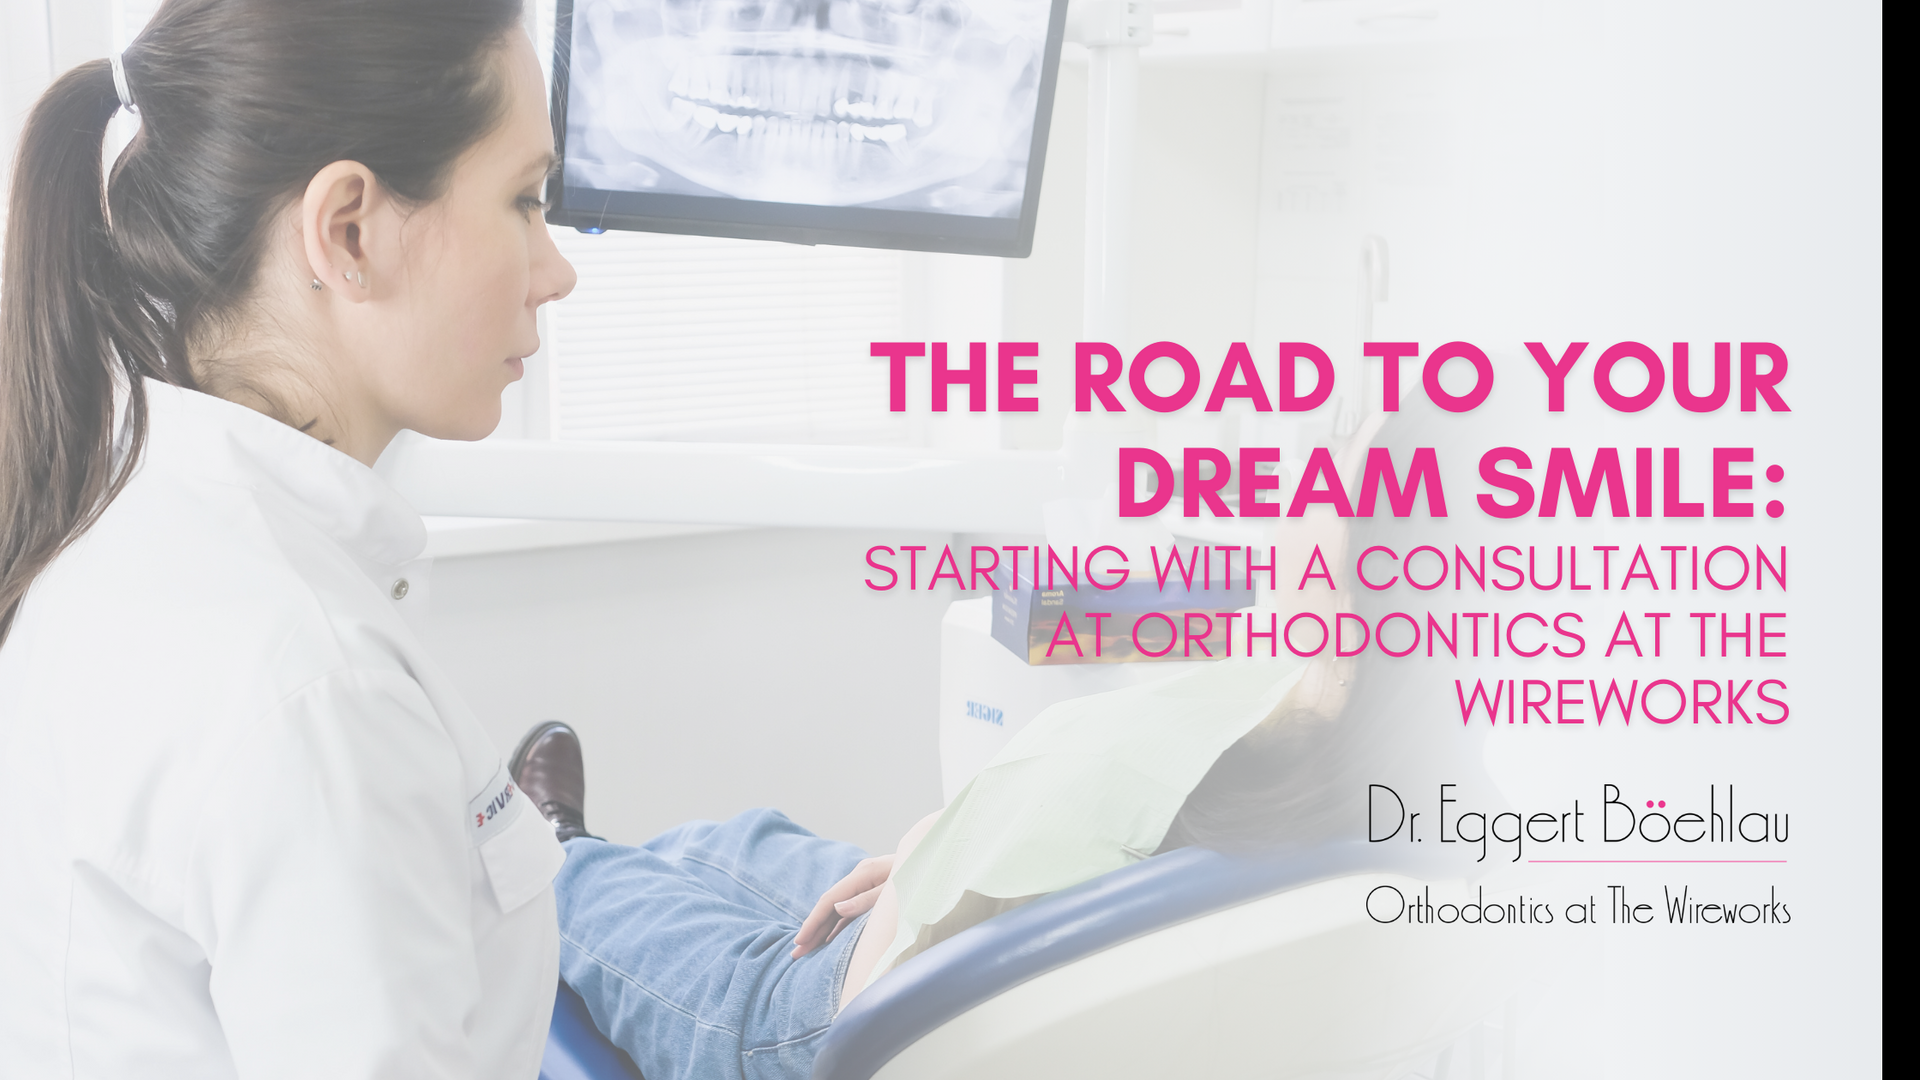 the road to your dream smile is starting with a consultation at orthodontics at the wireworks